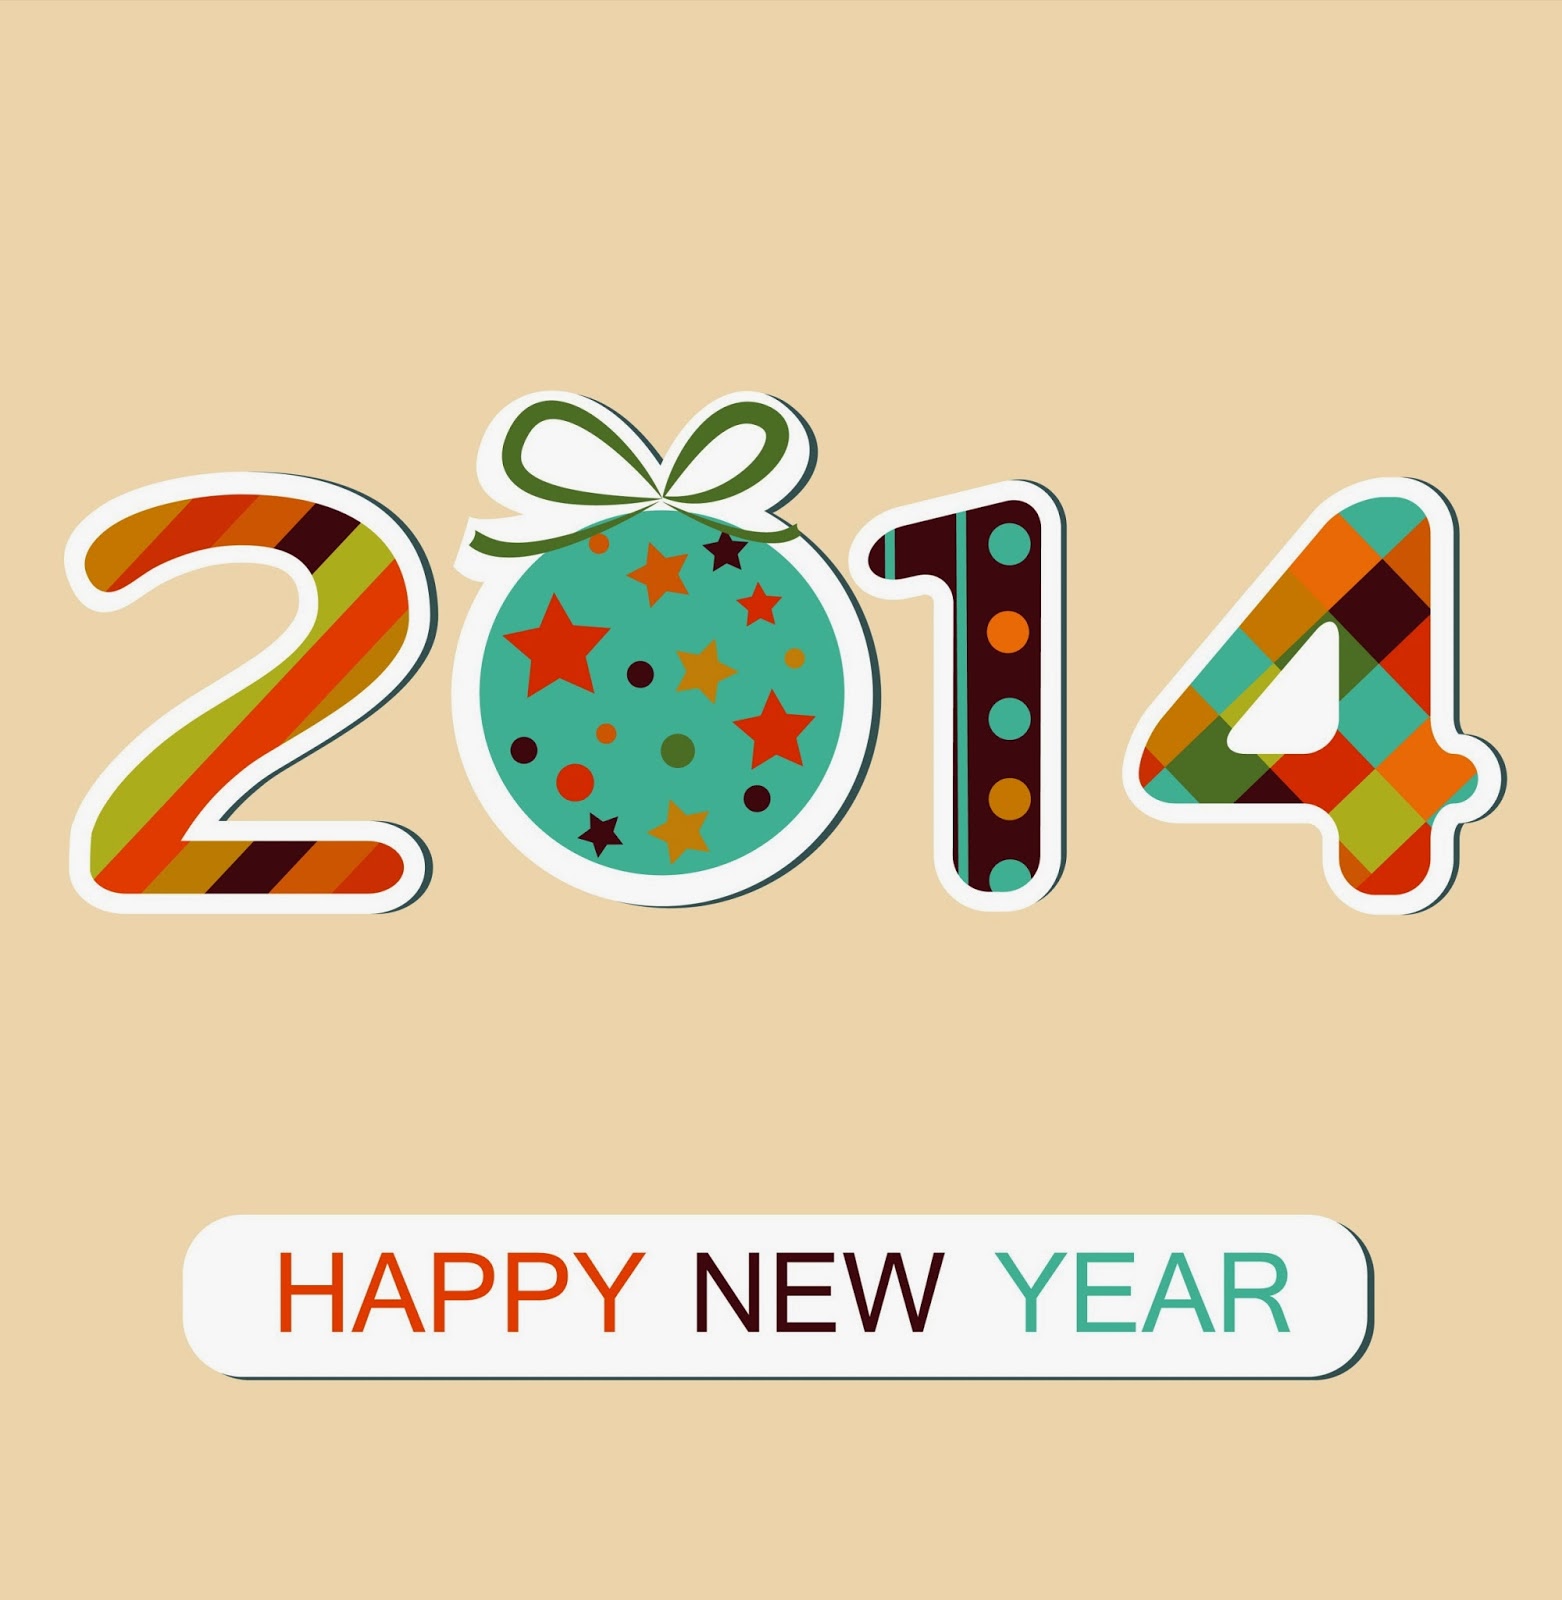 clipart of happy new year 2014 - photo #10